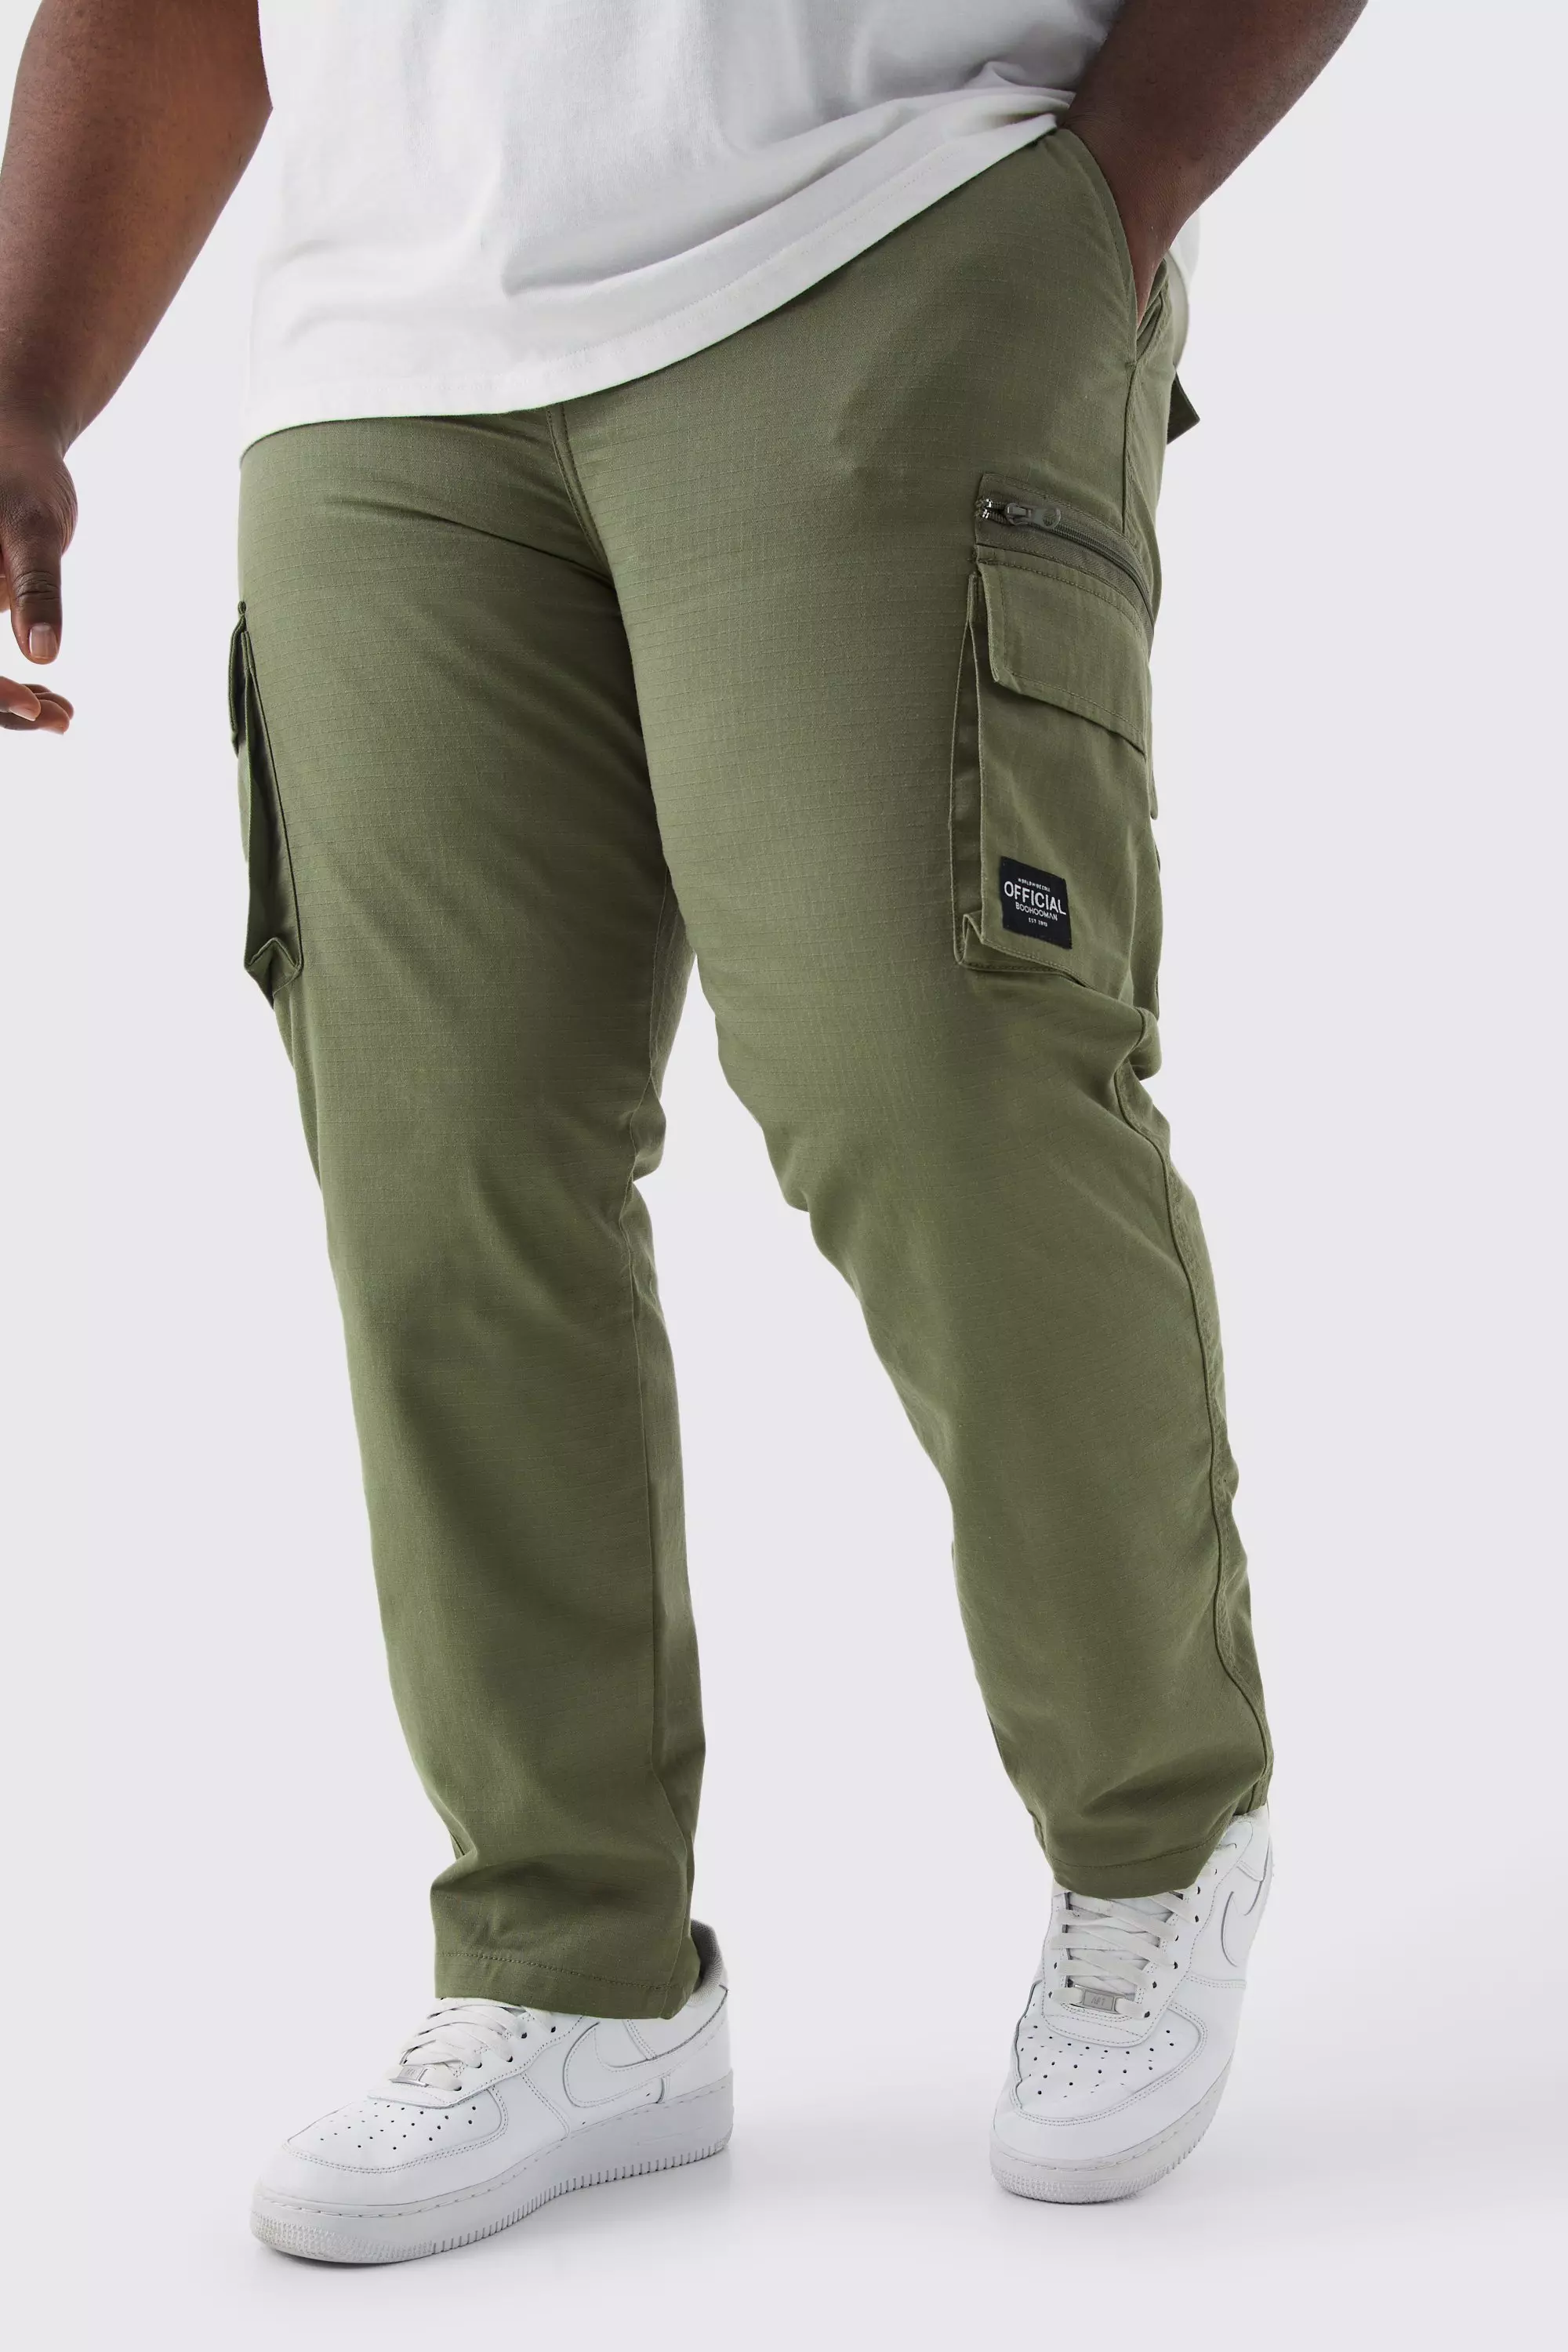 Plus Fixed Relaxed Ripstop Cargo Pants With Tab Khaki